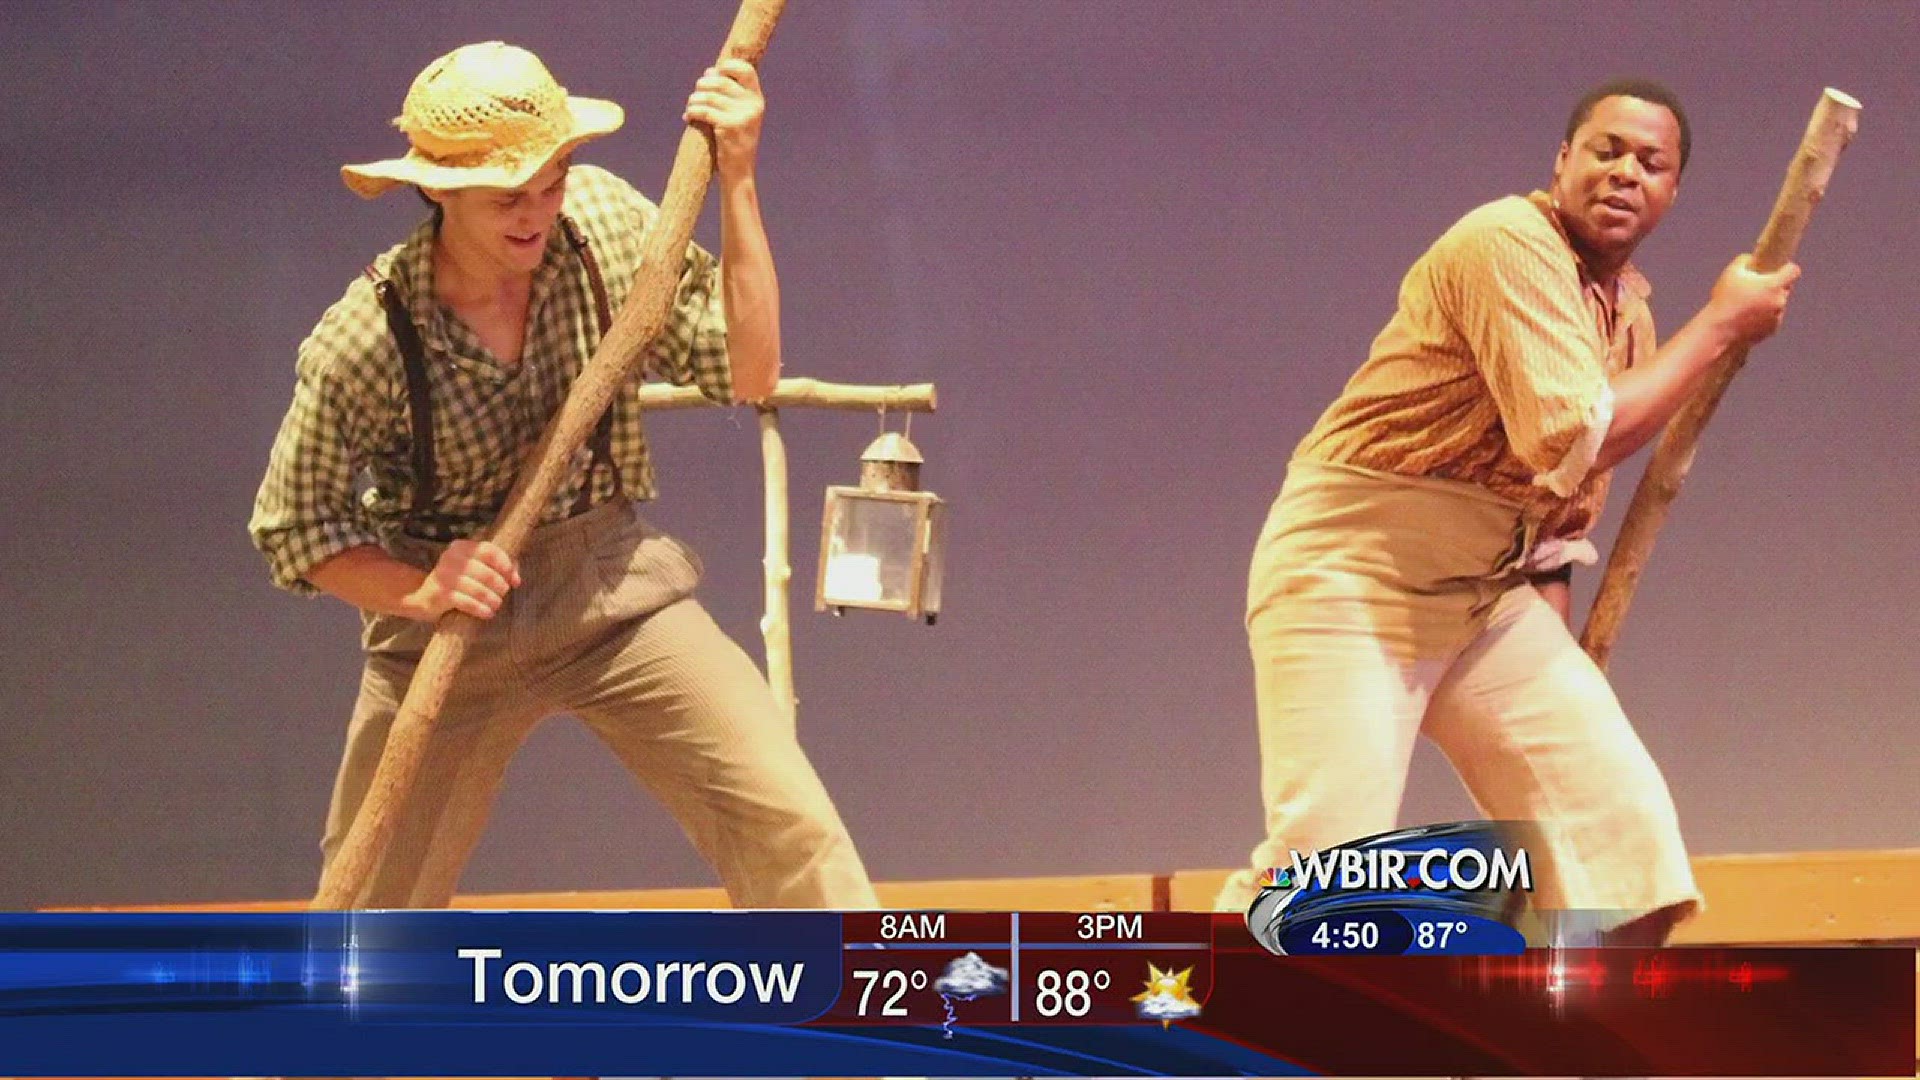 Dominic Gillett and Brady Moldrup of the WordPlayers group talk about their performance of "Big River" the musical. The show is based on the classic story of Huckleberry Finn and will take place on July 15 at 7:30 p.m. and July 17 at 3 p.m. at the Bijou.